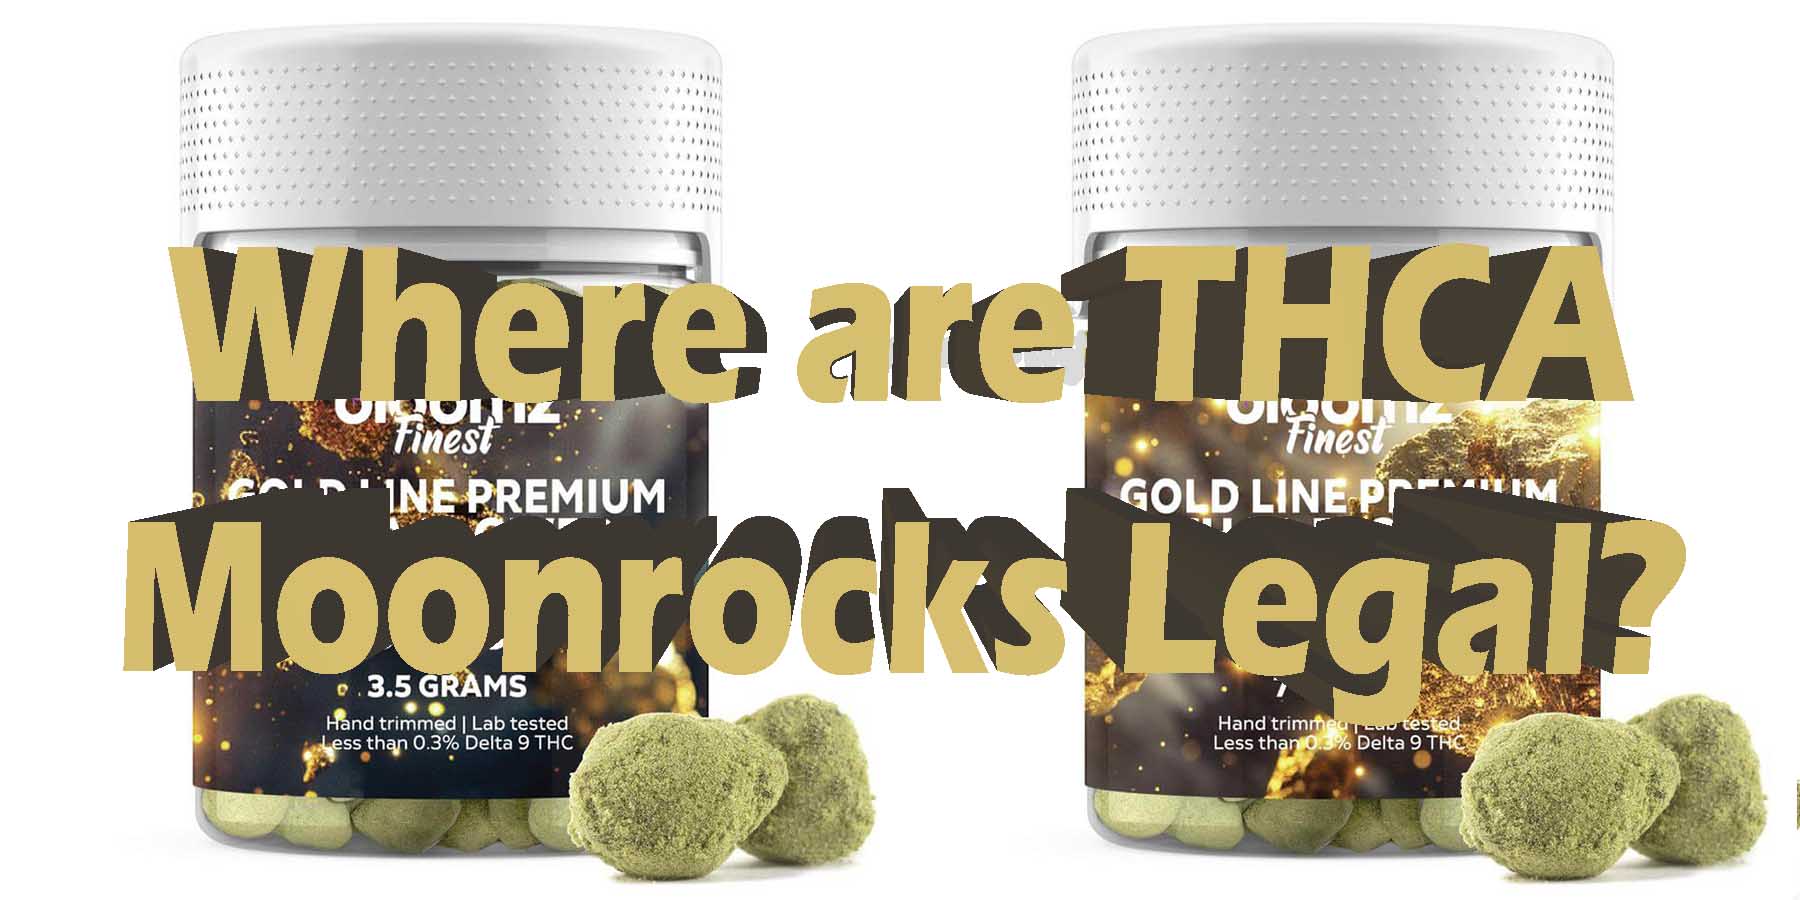 Where are THCA Moonrocks Legal THC LowestPrice Coupon Discount For Smoking Best High Smoke Shop Online Near Me Online Smoke Shop StrongestBrand Best Smoke Best Price Bloomz